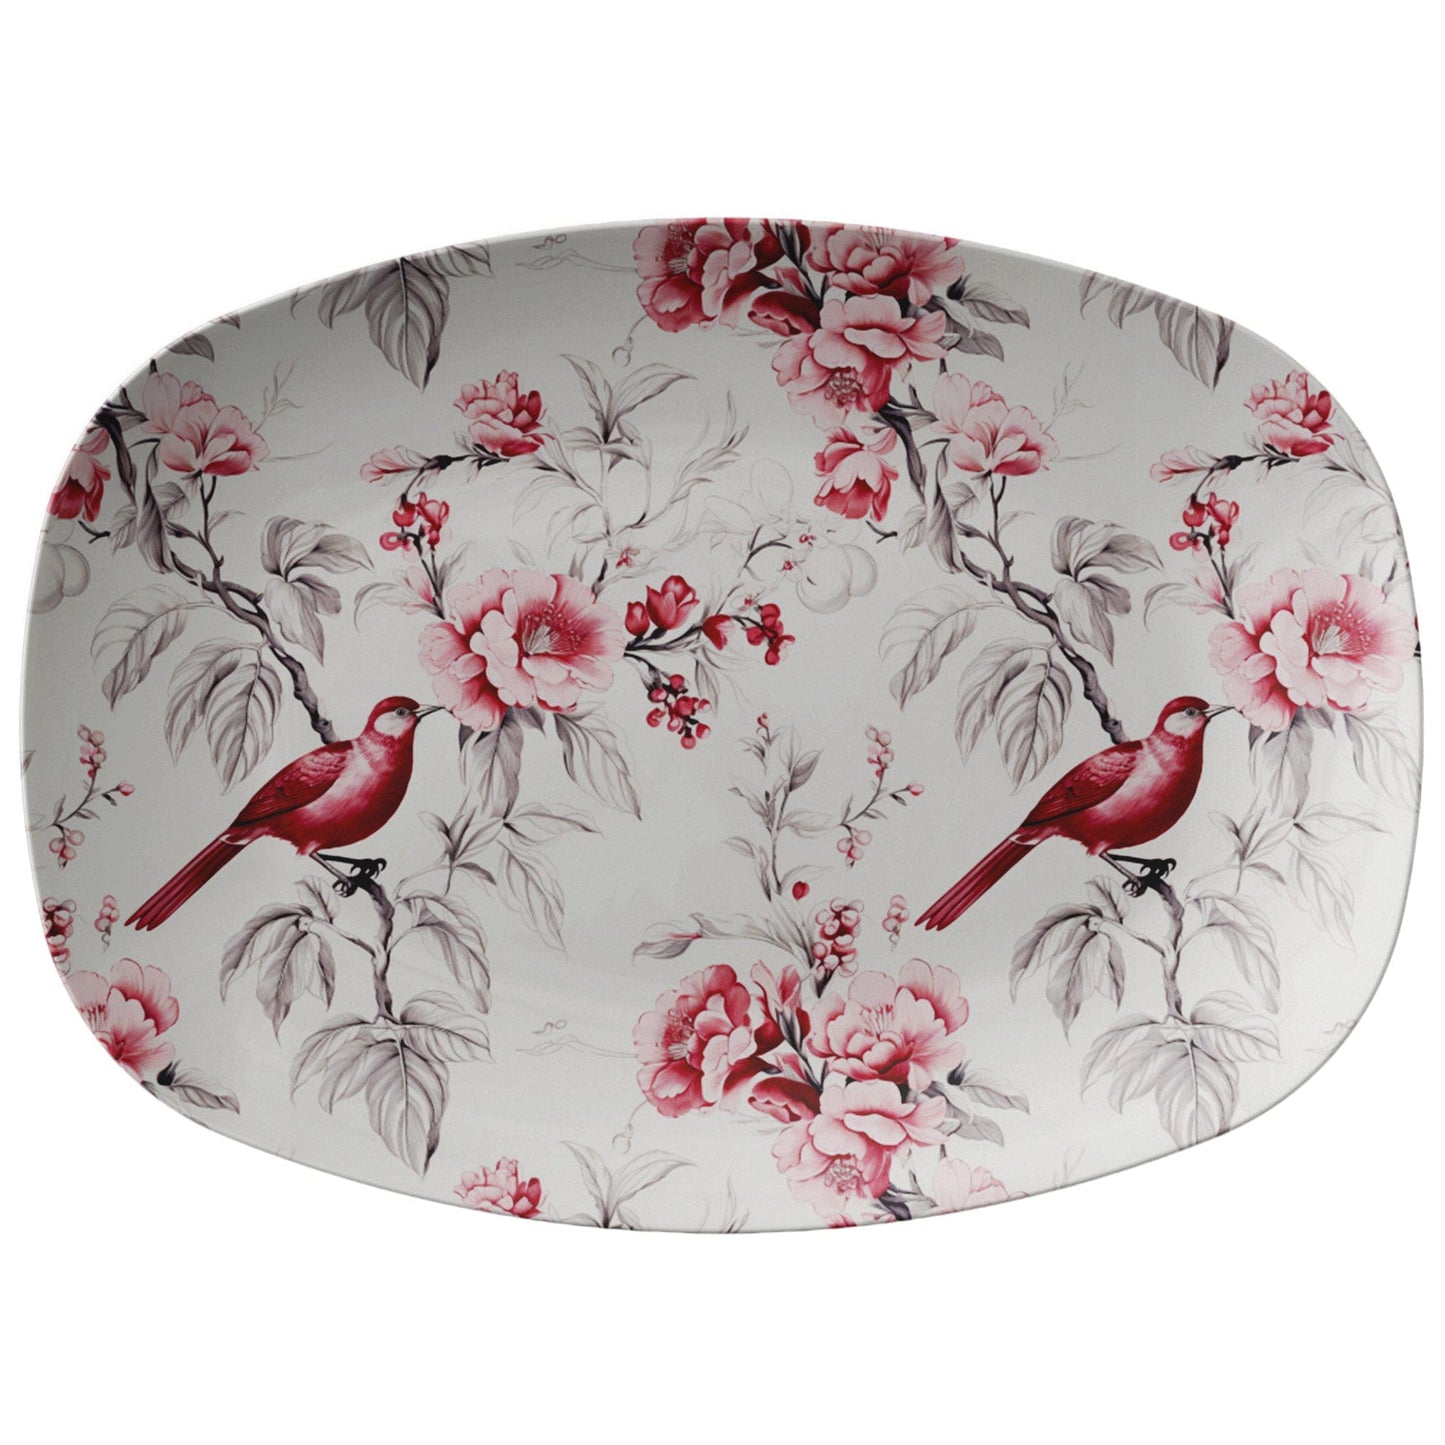 Kate McEnroe New York Chinoiserie Botanical Toile Floral Cranberry Red and White Serving Platter - 133682923 Serving Platters P23-CHI-CBR-4